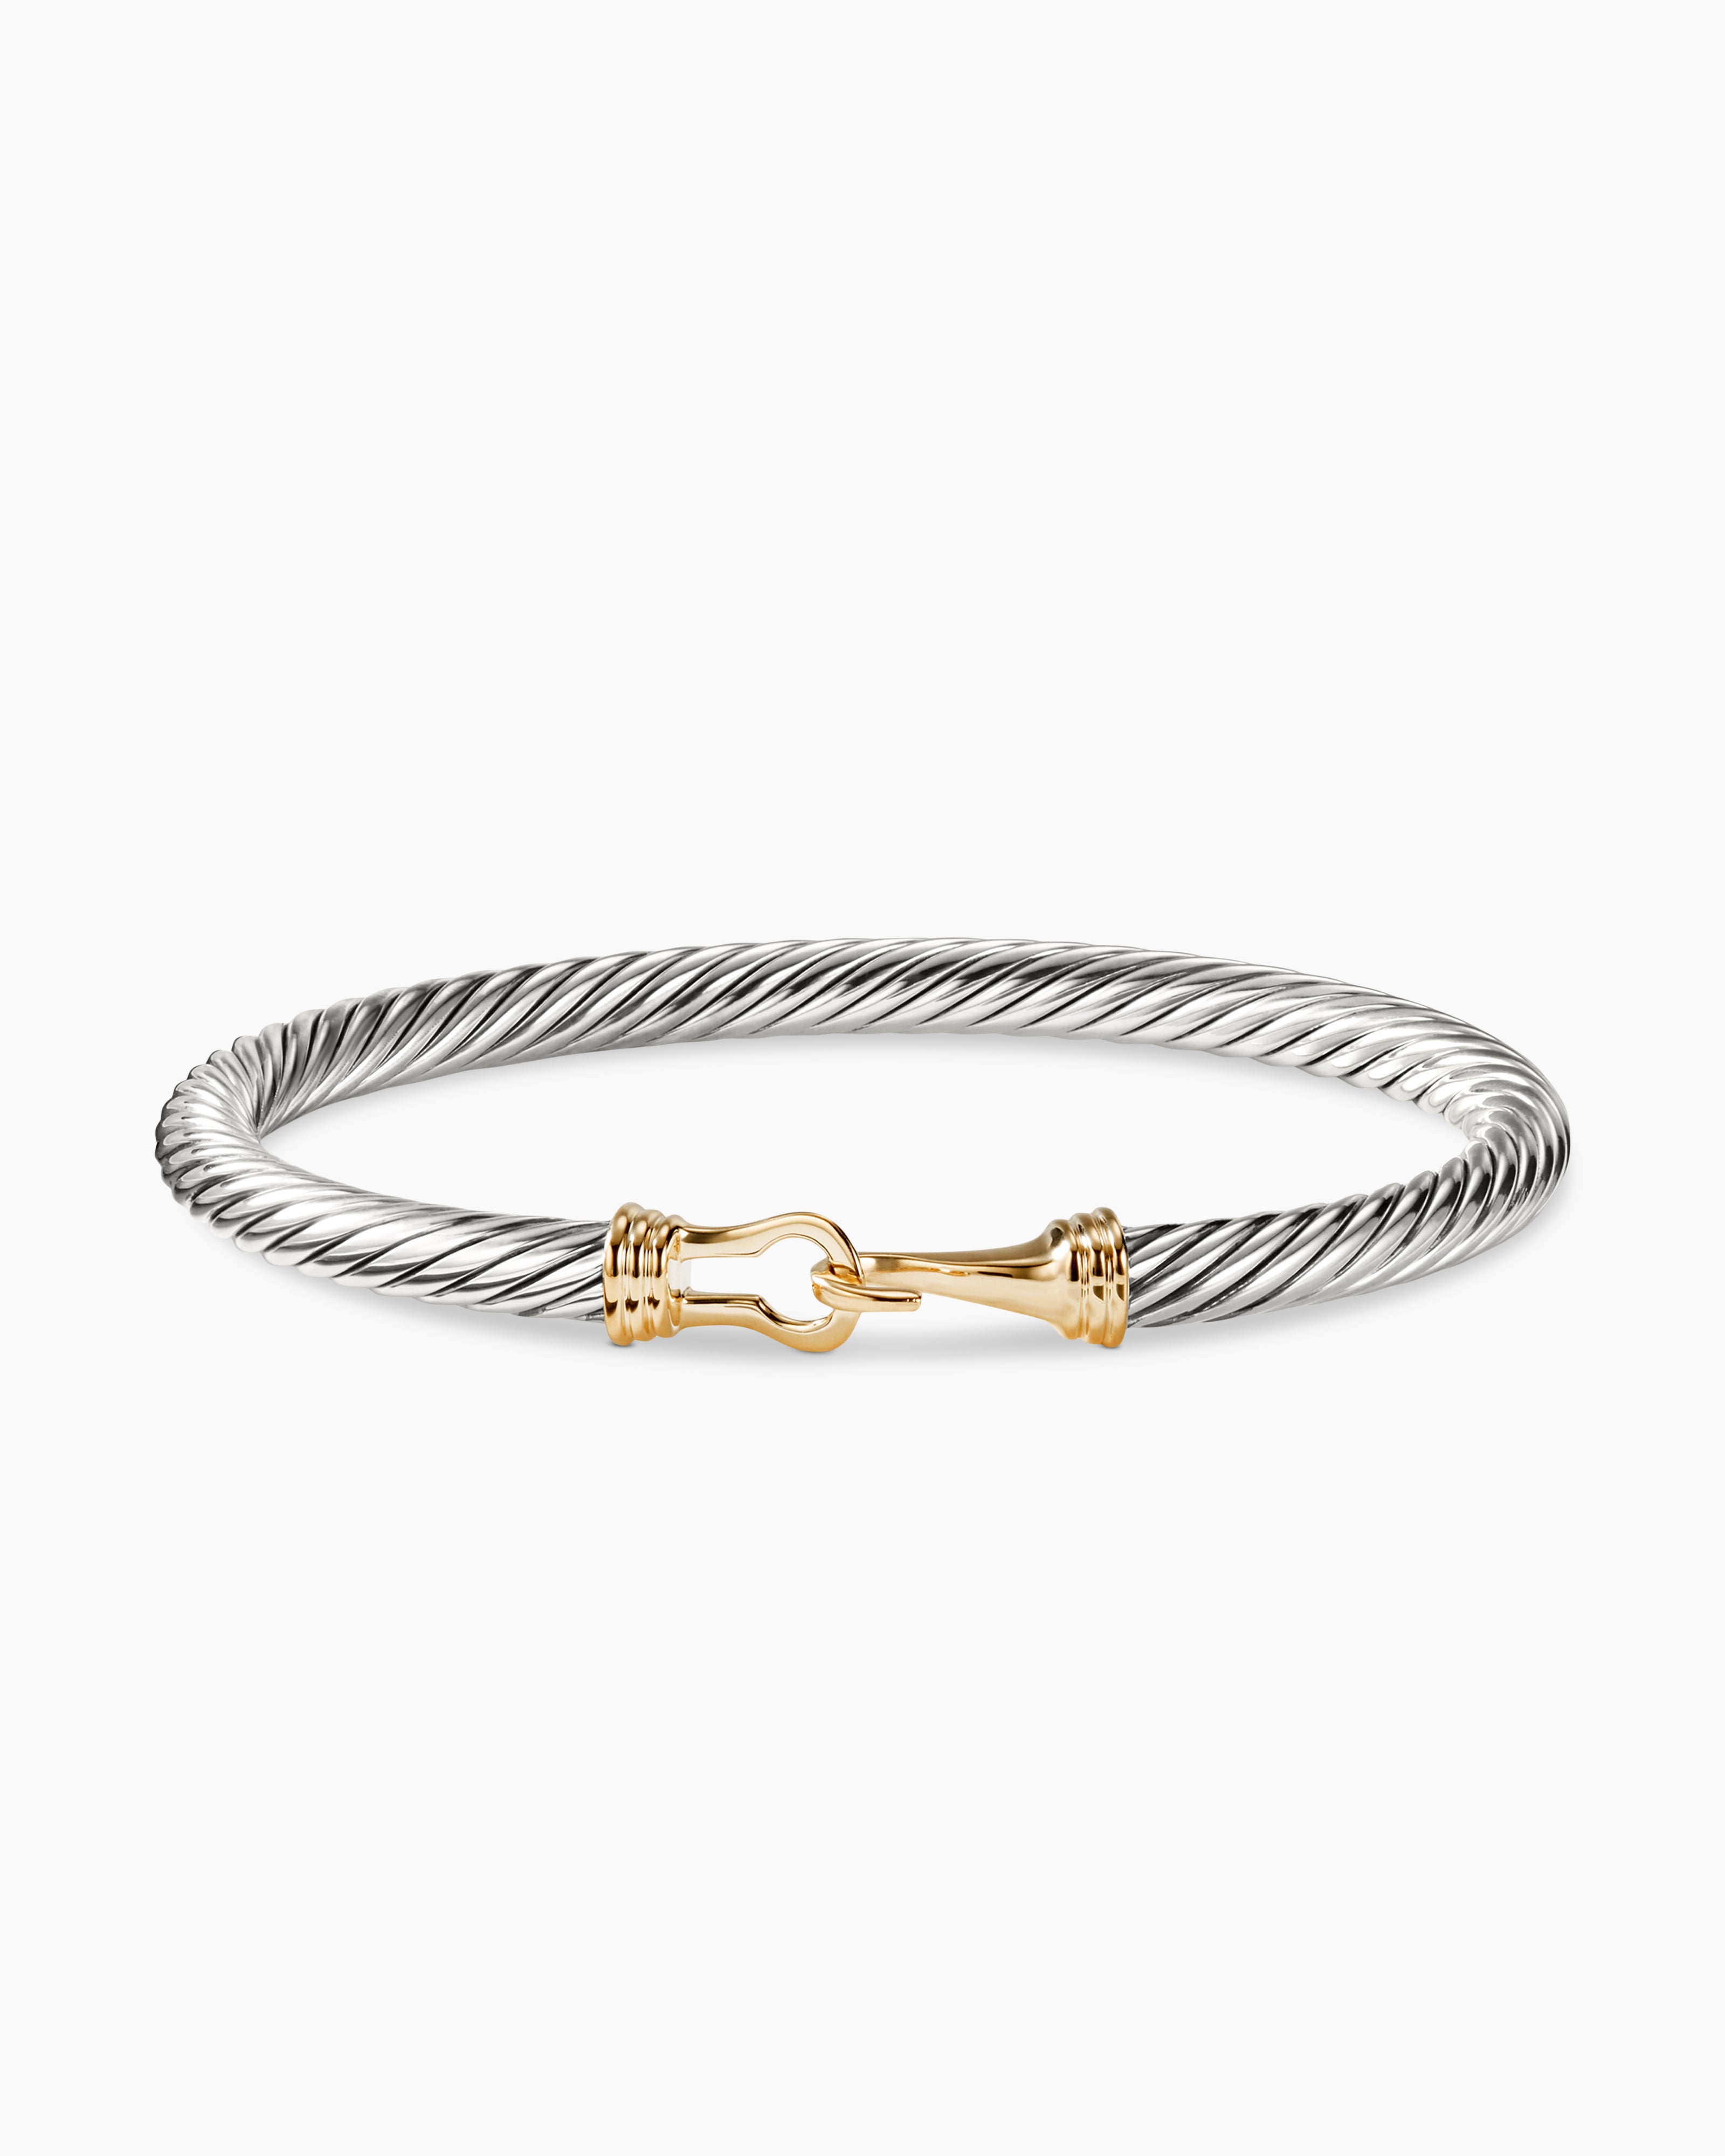 Buckle Classic Cable Bracelet in Sterling Silver with 14K Yellow Gold, 5mm